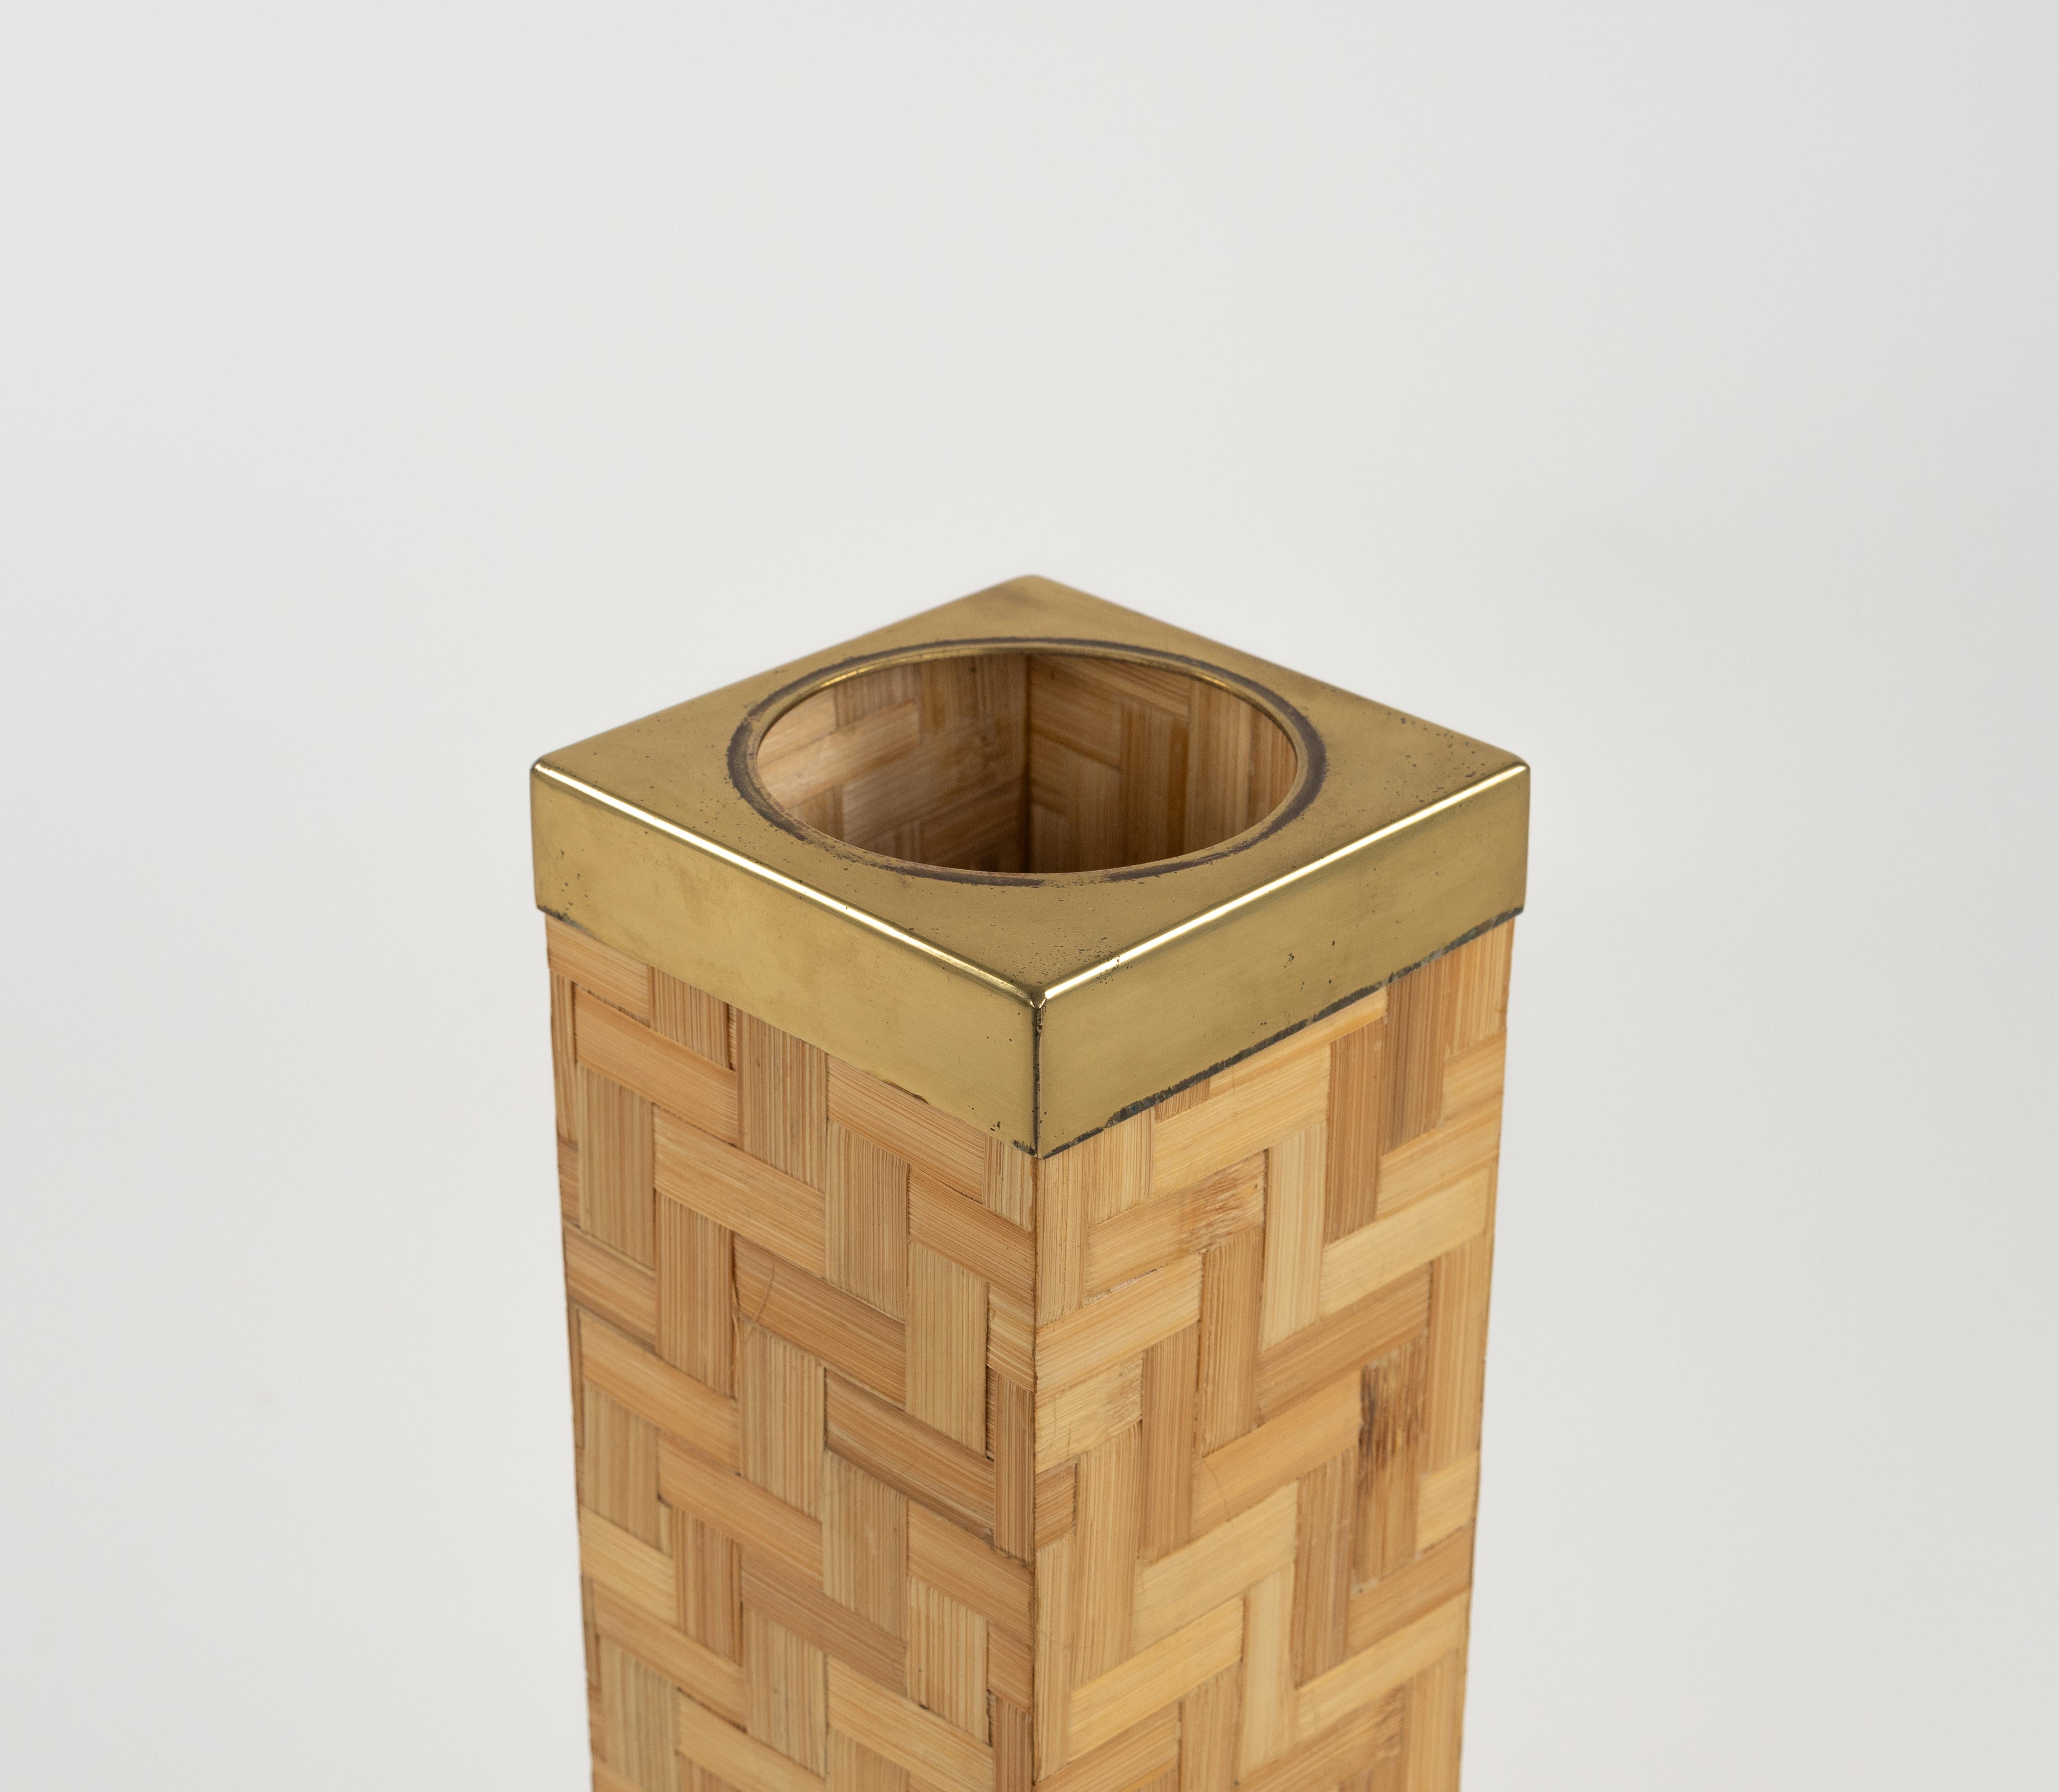 Midcentury Floor Ashtray in Bamboo and Brass, Italy 1970s For Sale 3